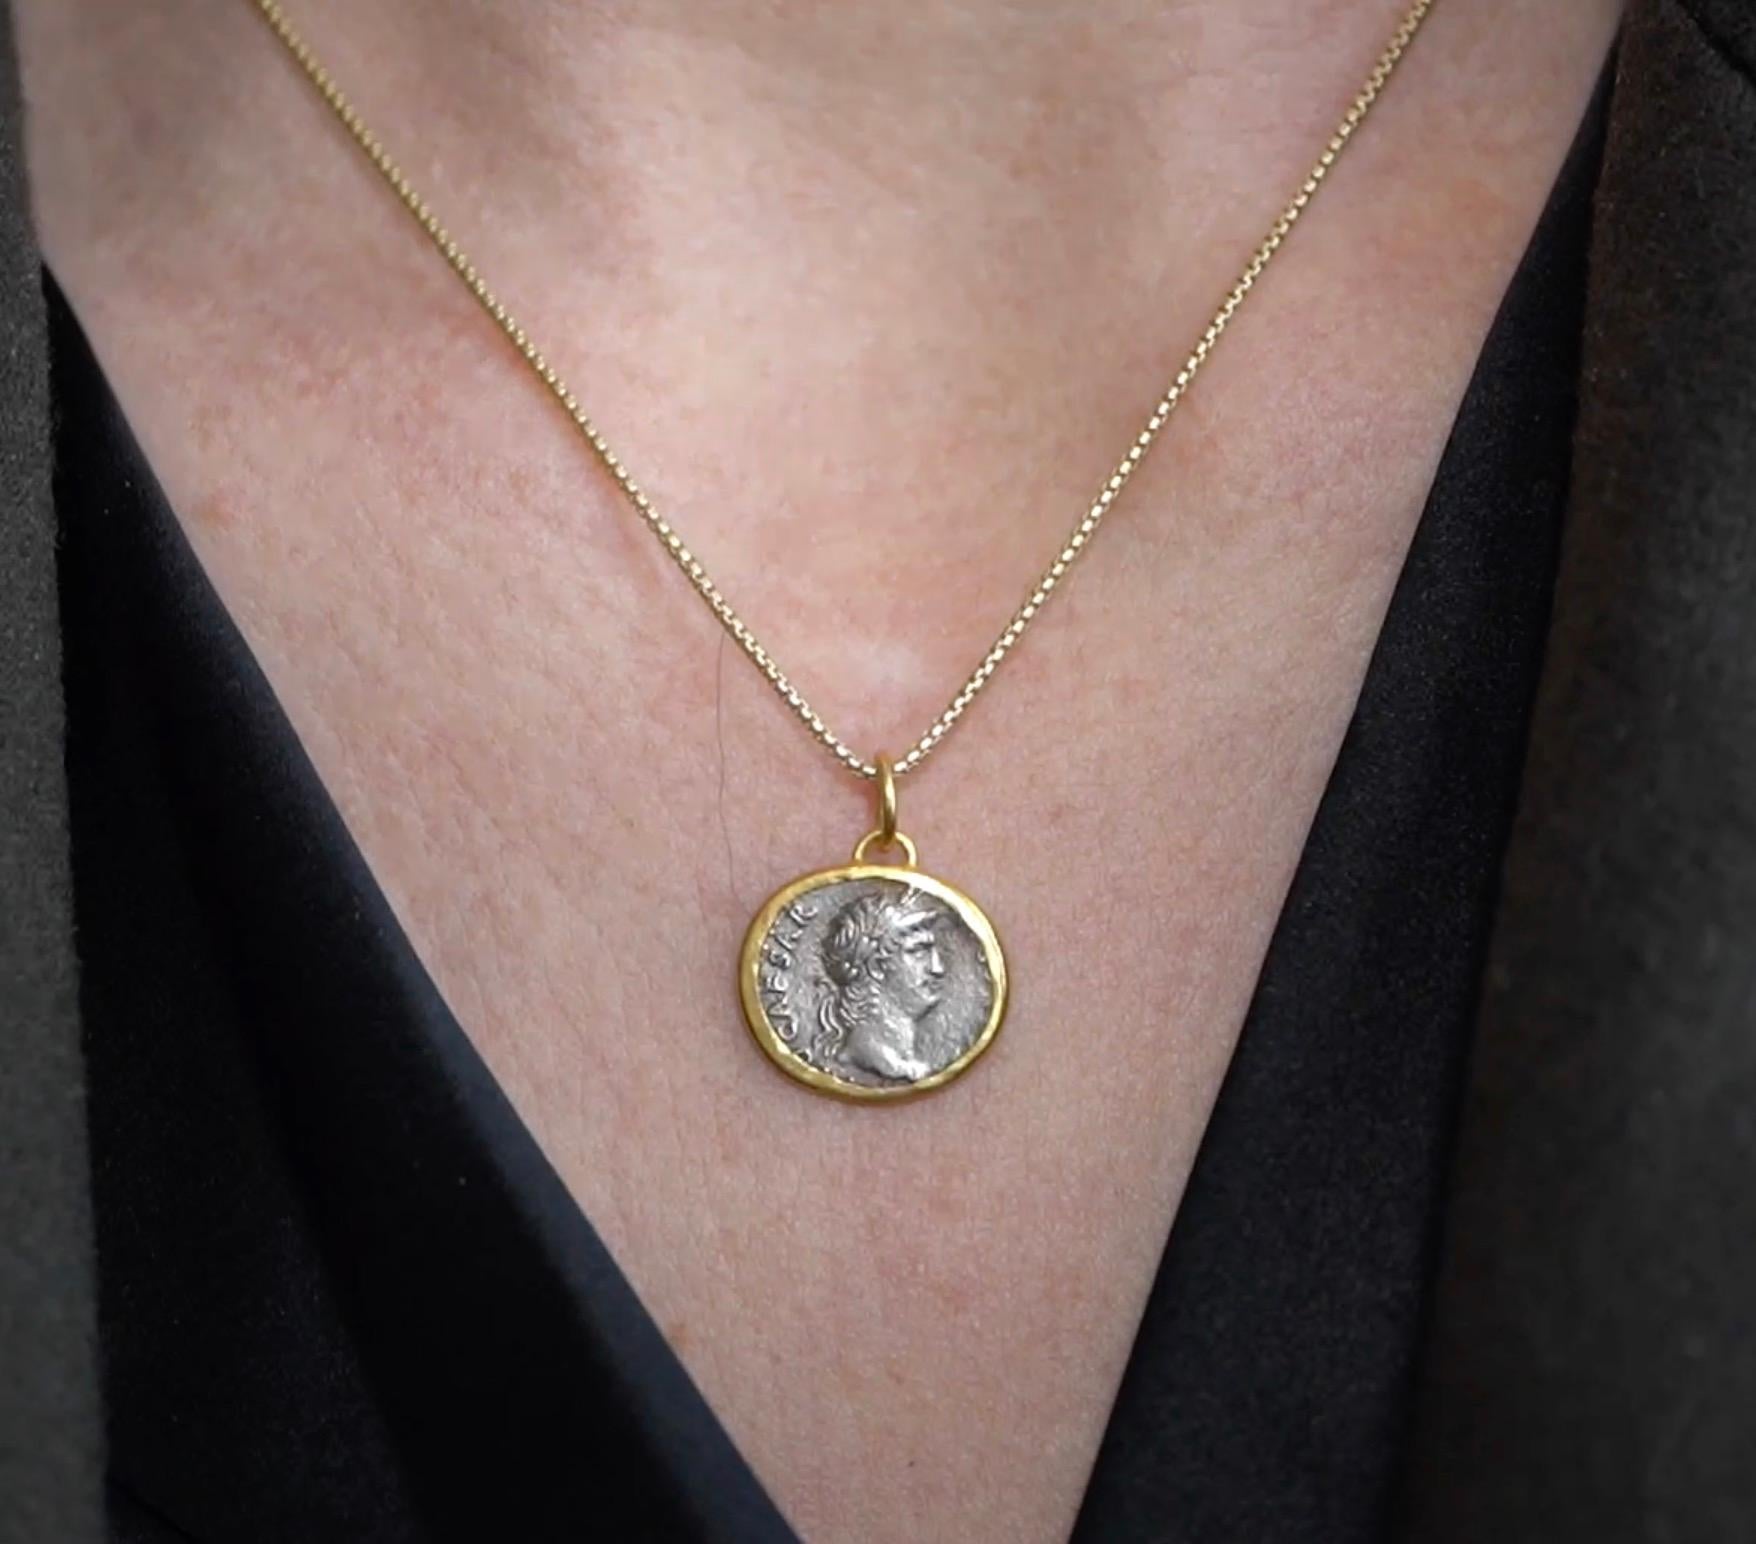 Classical Greek Julius Caesar Coin Replica Amulet Pendant Necklace with 24kt Gold and Silver